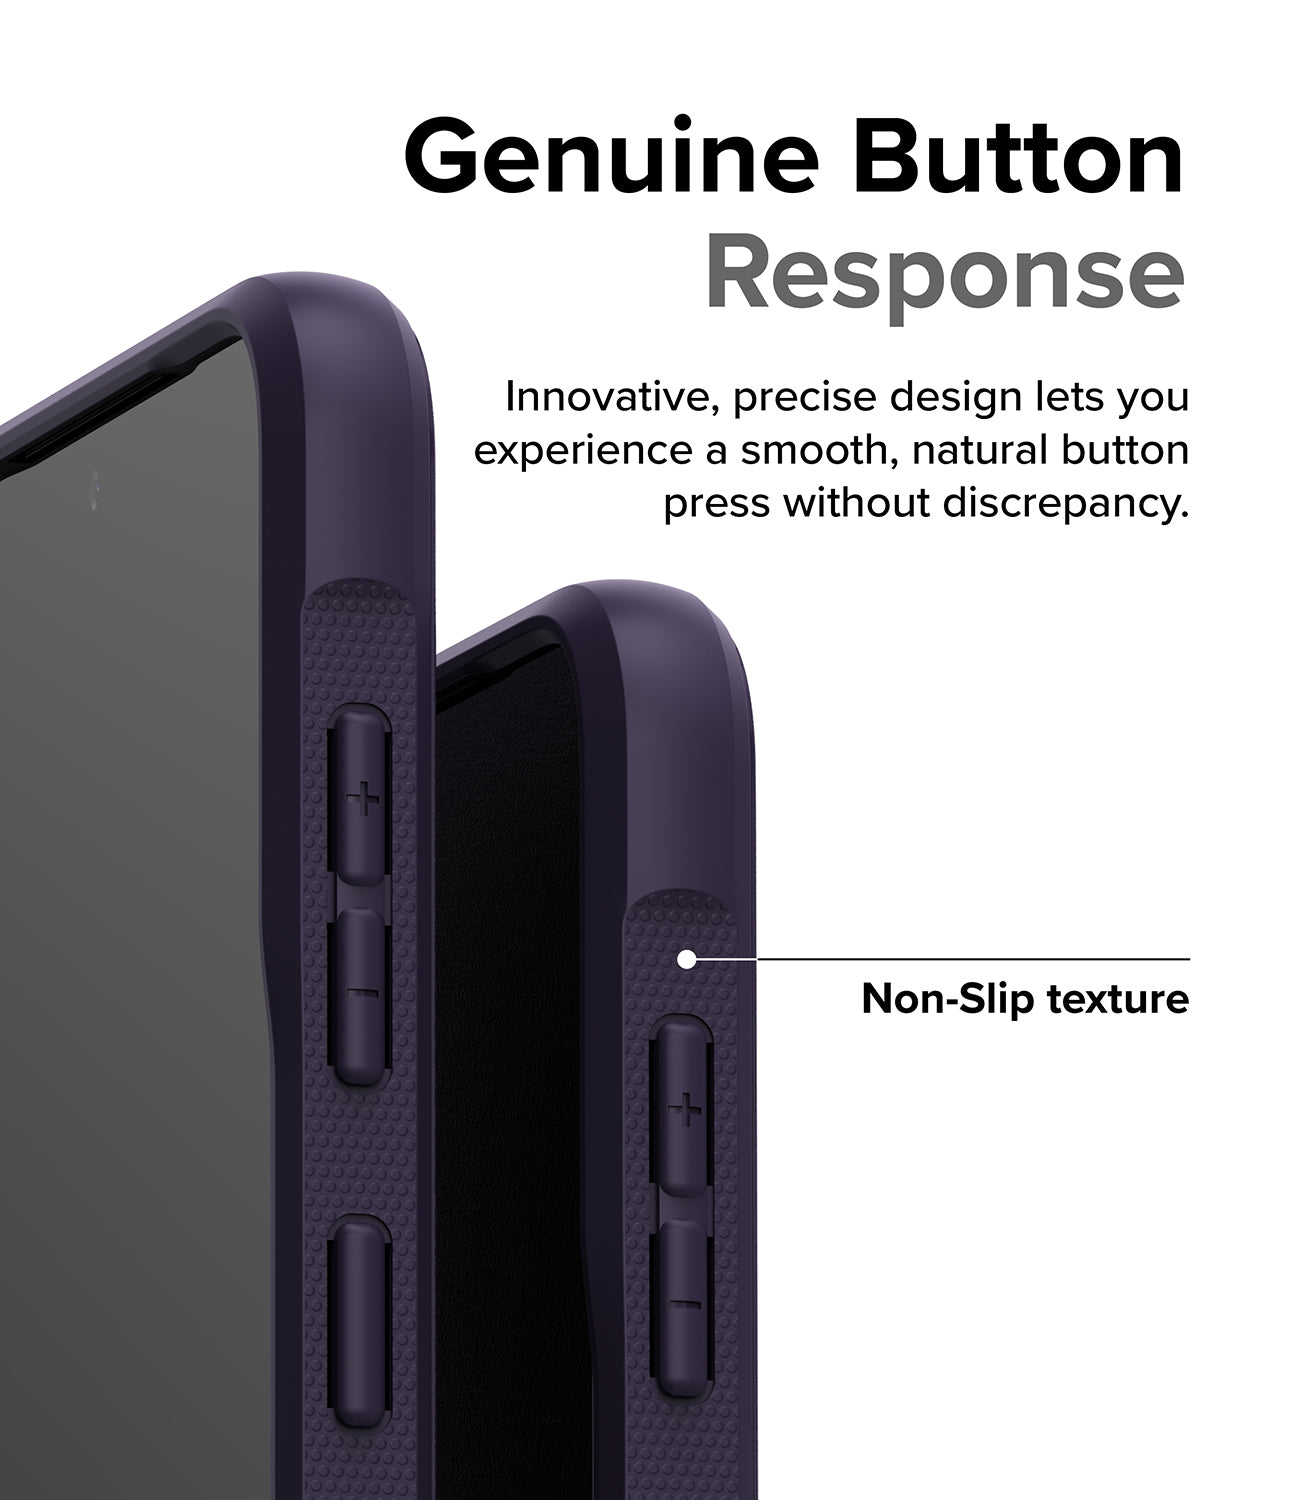 Galaxy S23 Plus Case | Onyx Deep Purple - Genuine Button Response. Innovative, precise design lets you experience a smooth, natural button press without discrepancy. Non-Slip texture.